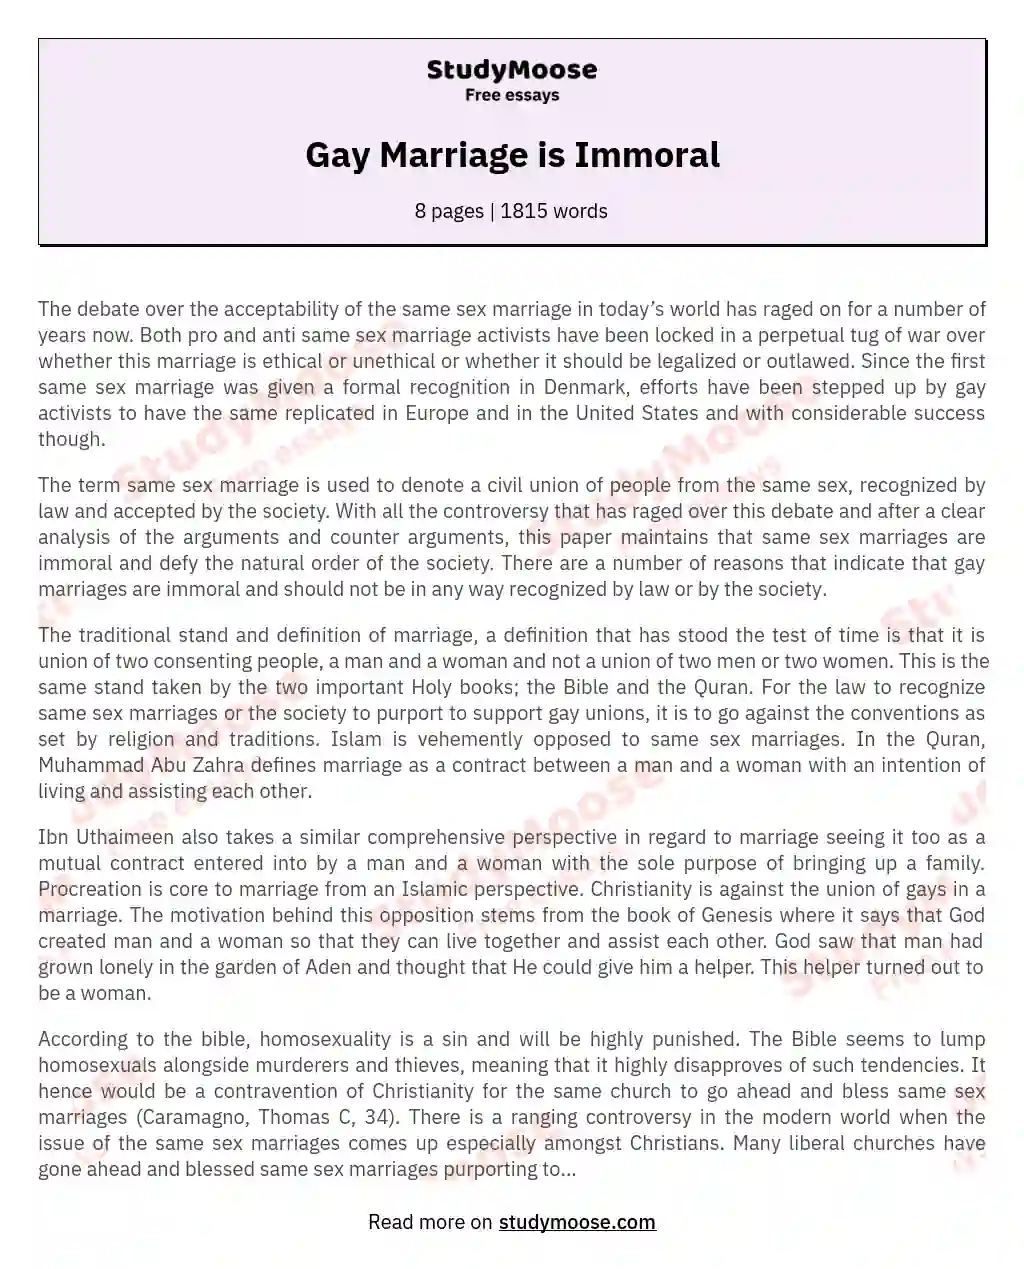 Gay Marriage is Immoral